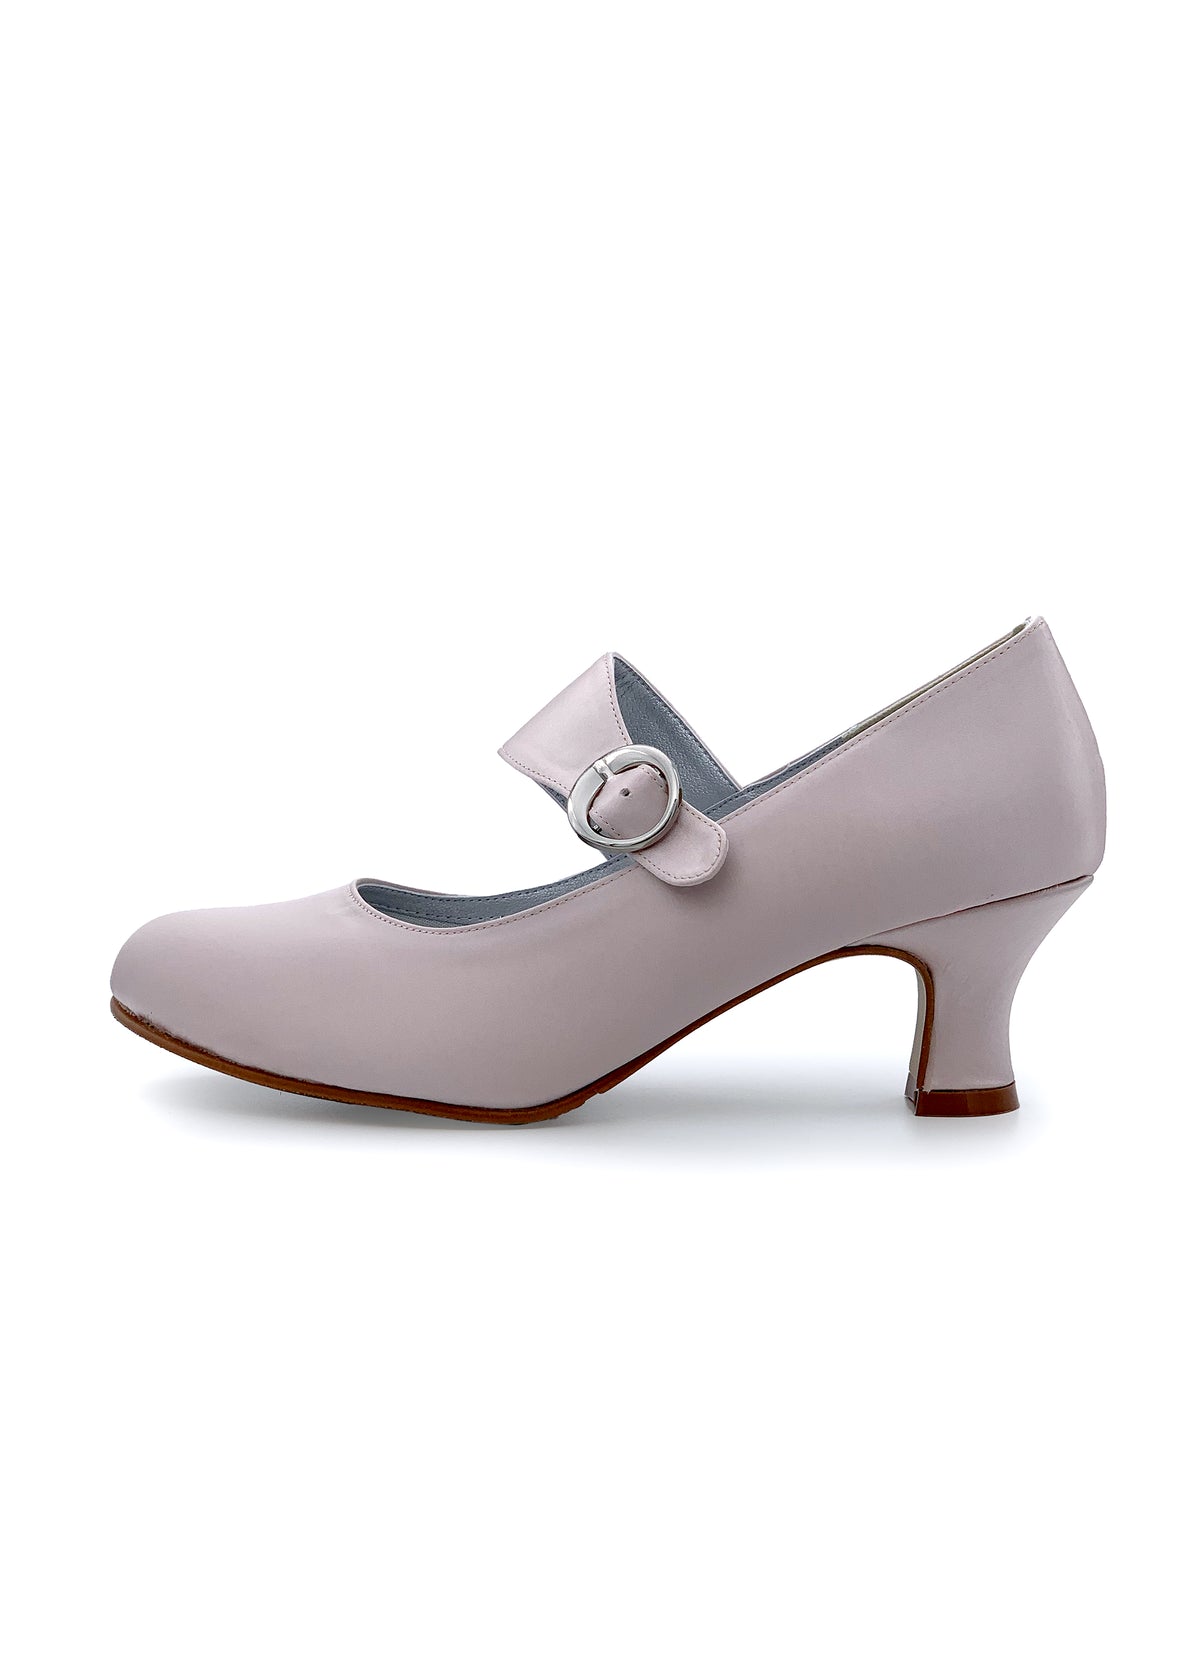 Open toe shoes with wide buckle strap - powder-toned satin